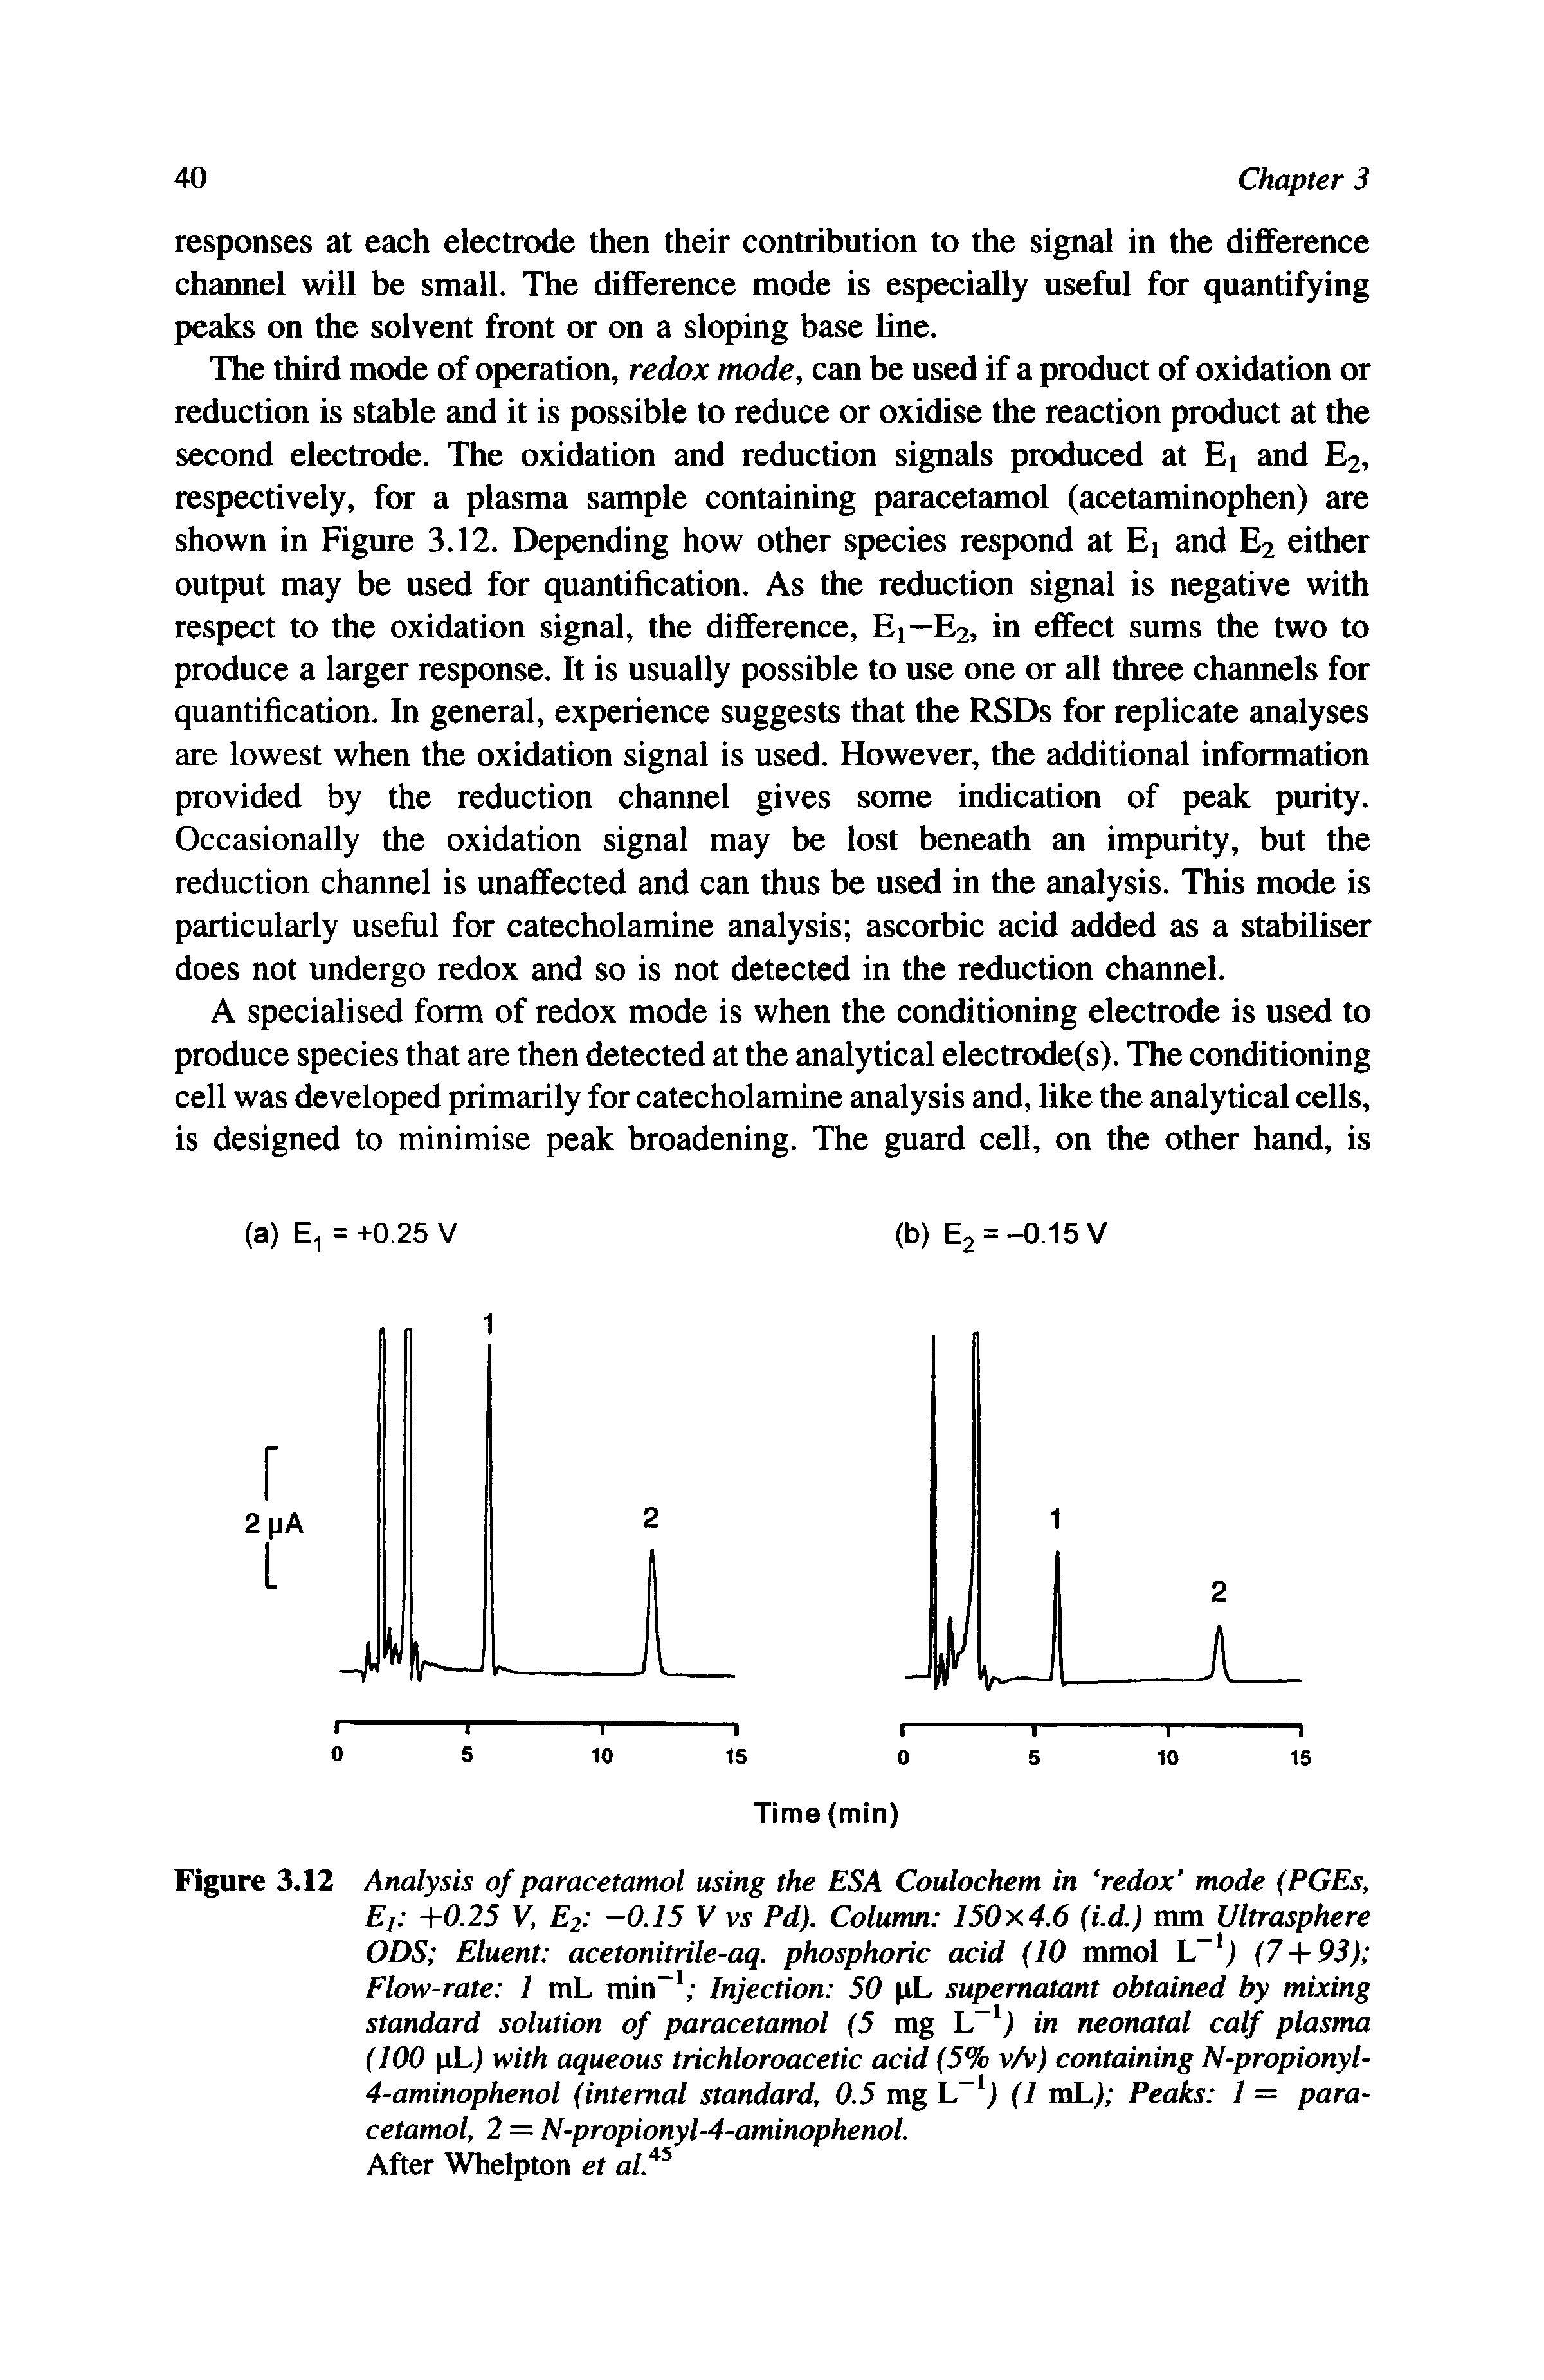 Figure 3.12 Analysis of paracetamol using the ESA Coulochem in redox mode (PGEs, Ej +0.25 V, E2 —0.15 V vs Pd). Column 150x4.6 (i.d) mm Ultrasphere ODS Eluent acetonitrile-aq. phosphoric acid (10 mmol L ) (7+93) Flow-rate 1 mL min Injection 50 pL supernatant obtained by mixing standard solution of paracetamol (5 mg L ) in neonatal calf plasma (100 pL) with aqueous trichloroacetic acid (5% v/v) containing N-propionyl-4-aminophenol (internal standard, 0.5 mg L ) (1 mL) Peaks 1 = paracetamol, 2 = N-propionyl-4-aminophenol.